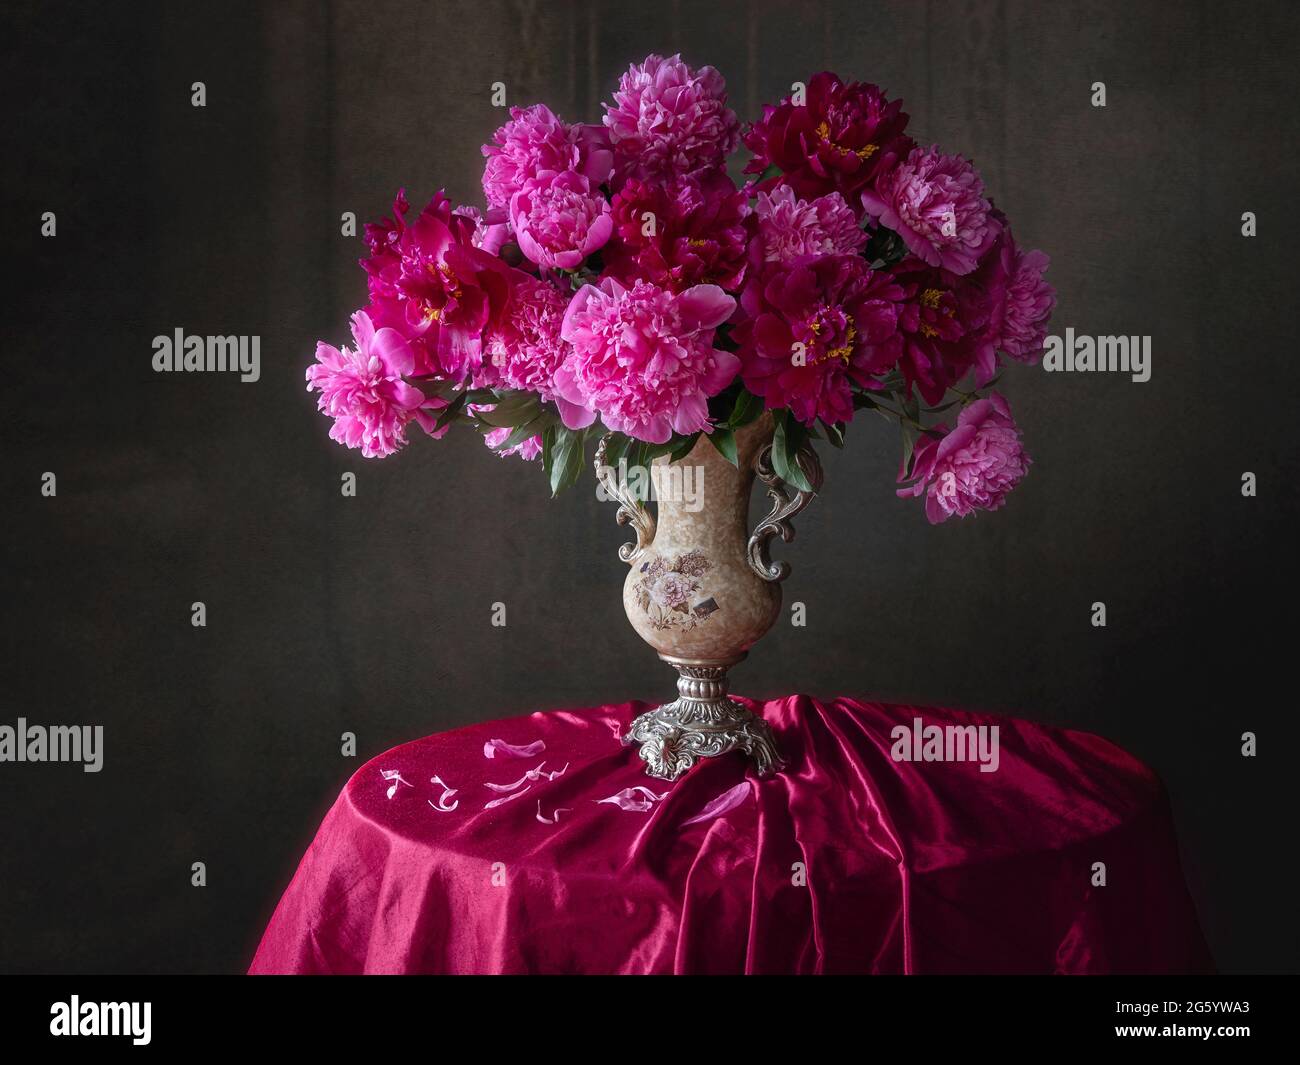 A bouquet of peonies in the interior of the living room Stock Photo